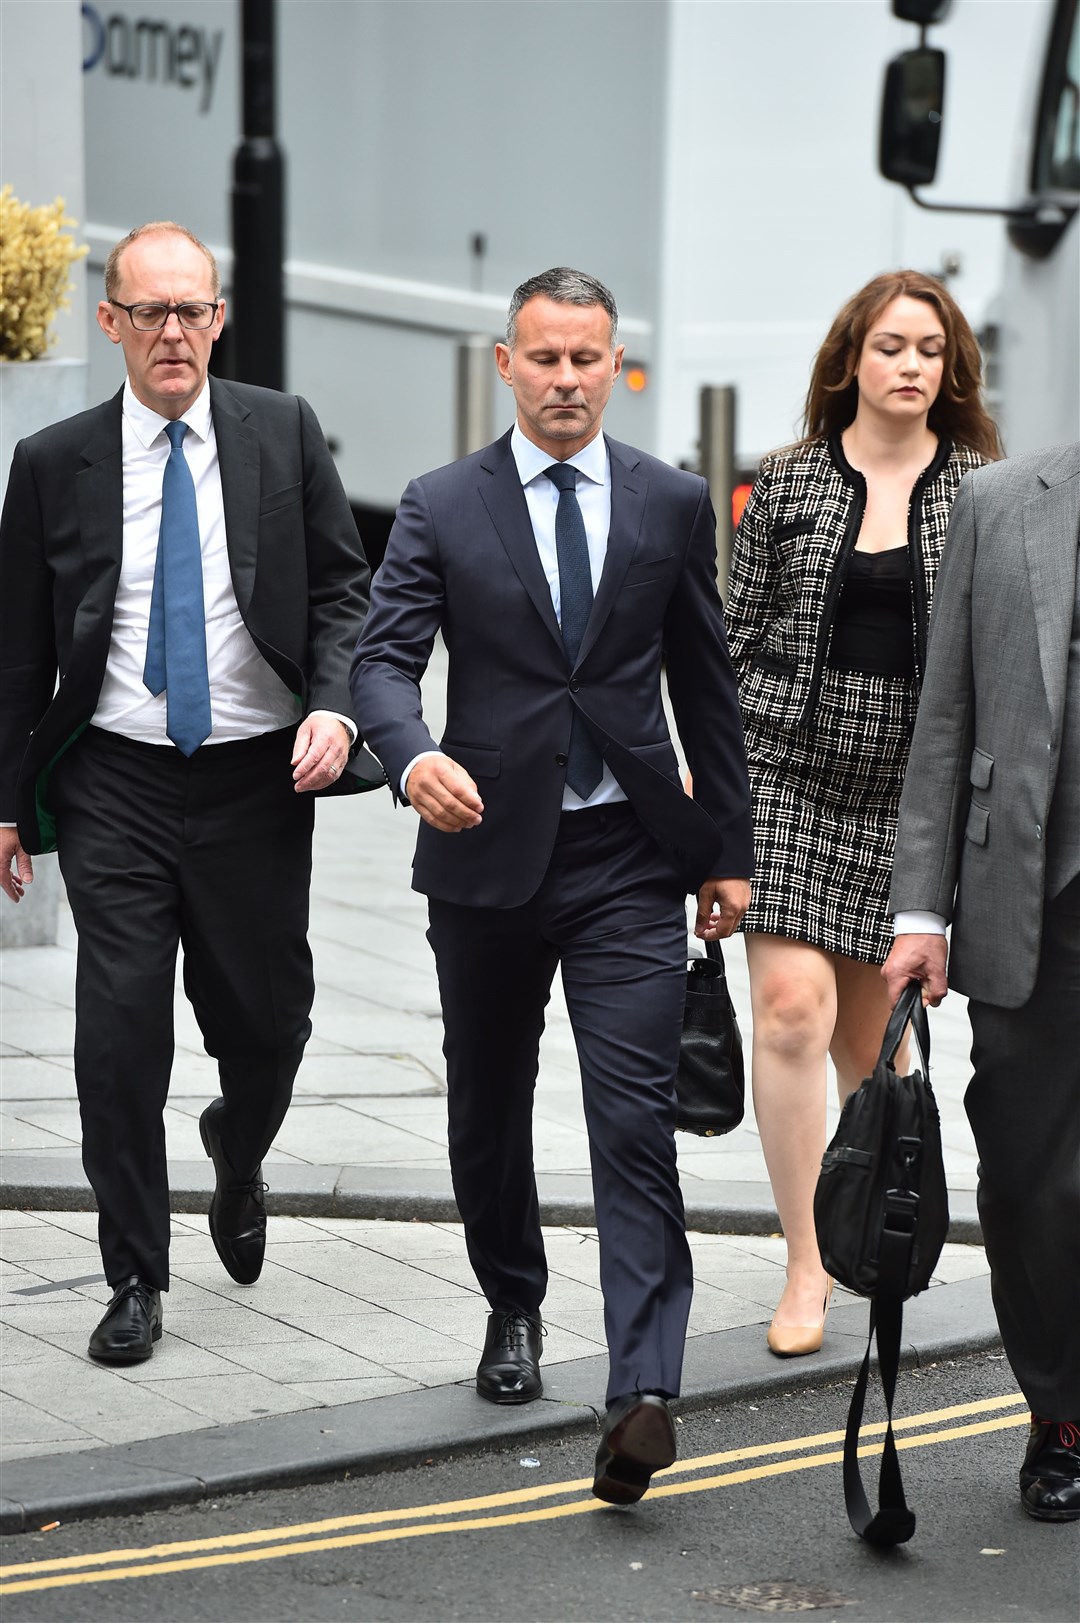 Former Manchester United footballer Ryan Giggs (centre) arrives at Manchester Crown Court (PA)